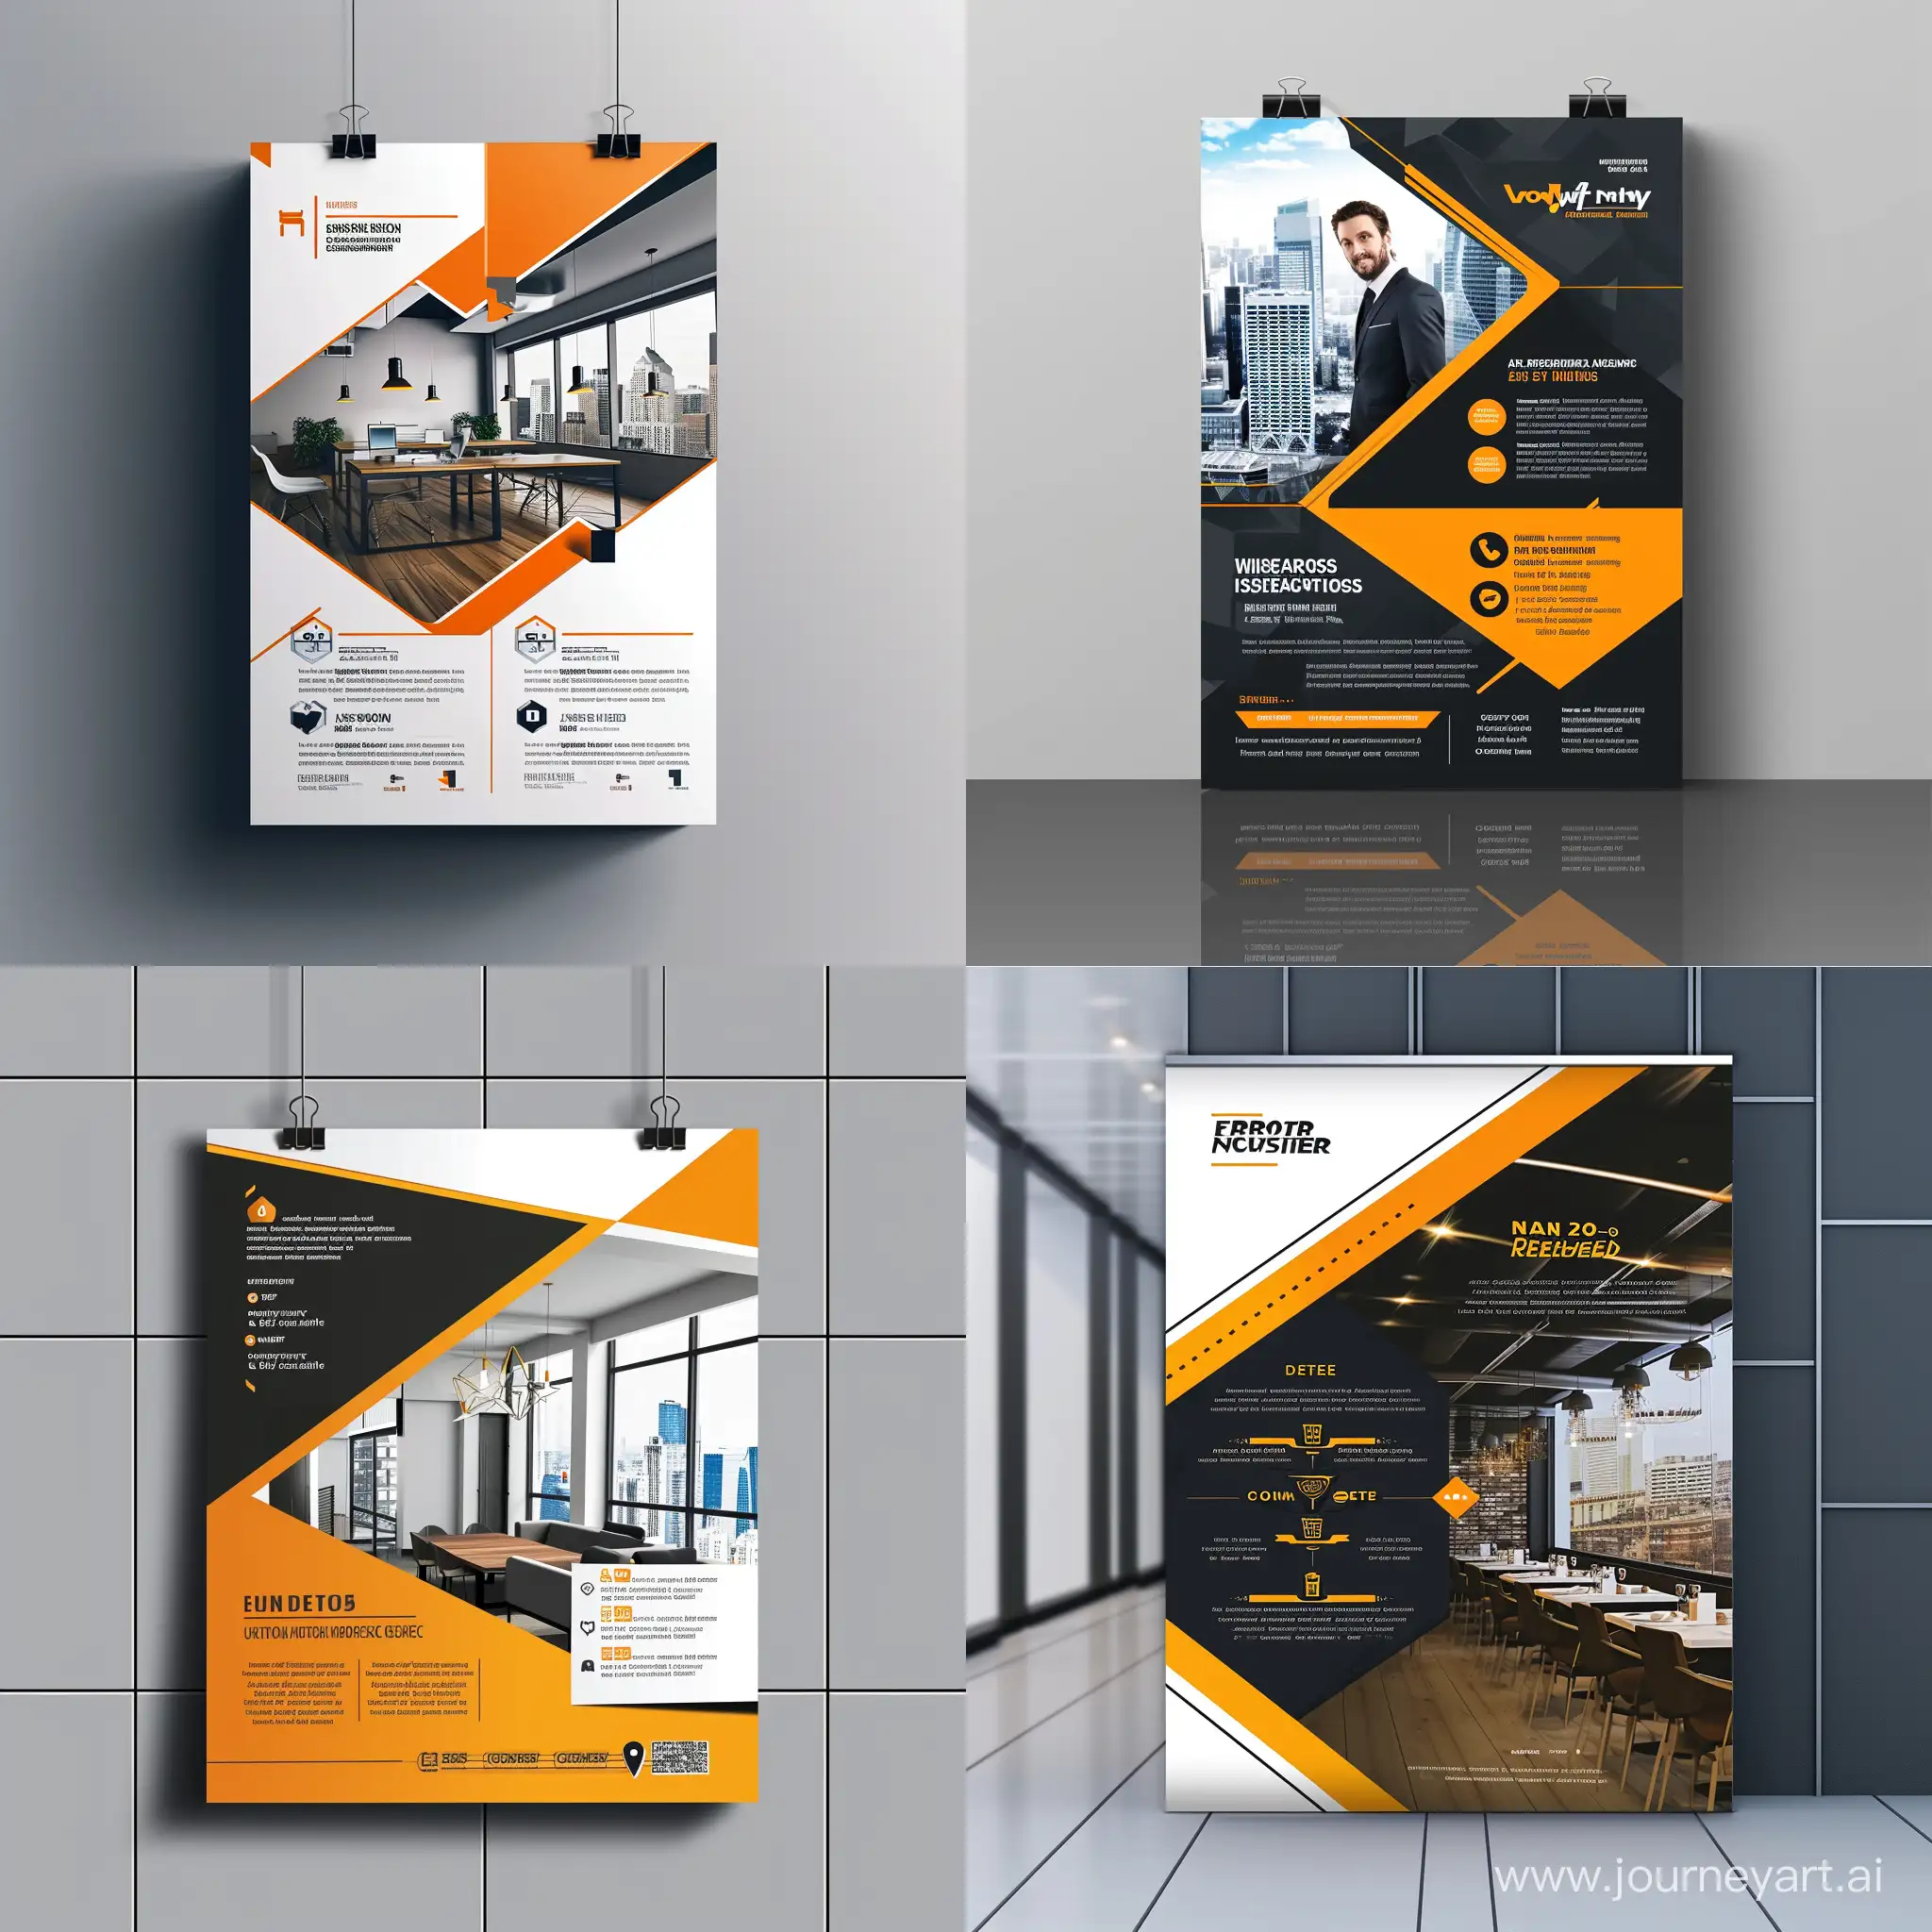 design professional flyer or poster for your business in just 24 hours